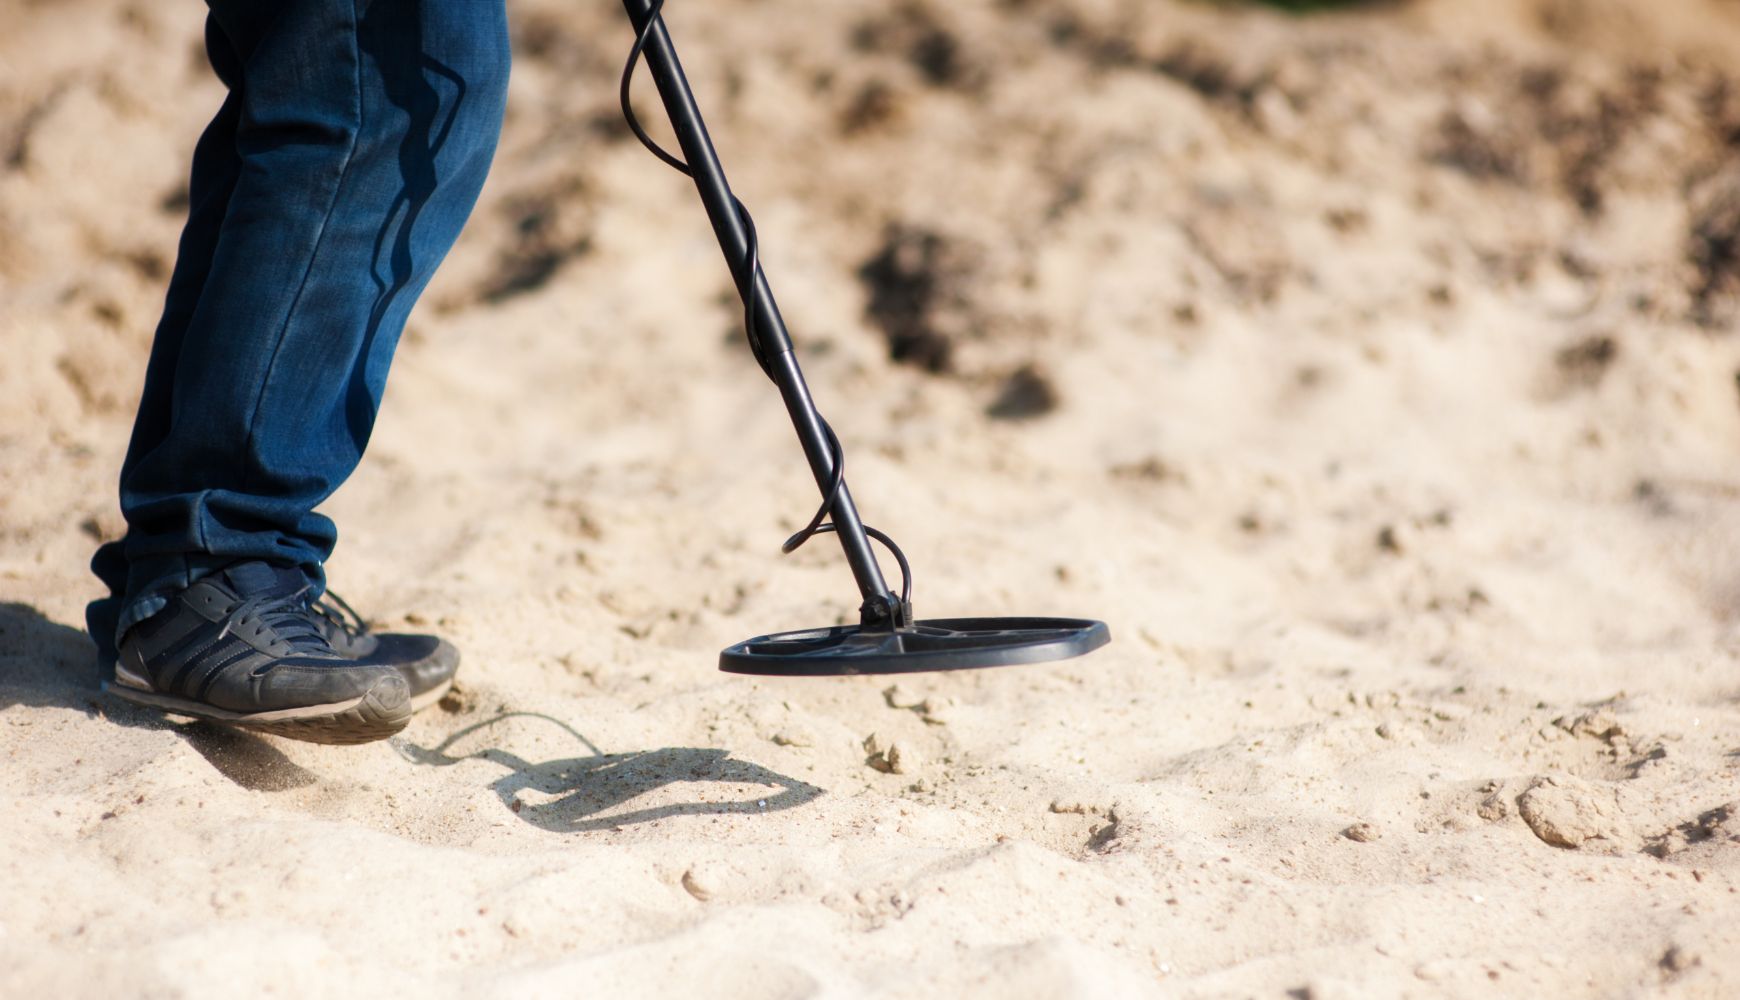 Common Places To Search With a Metal Detector